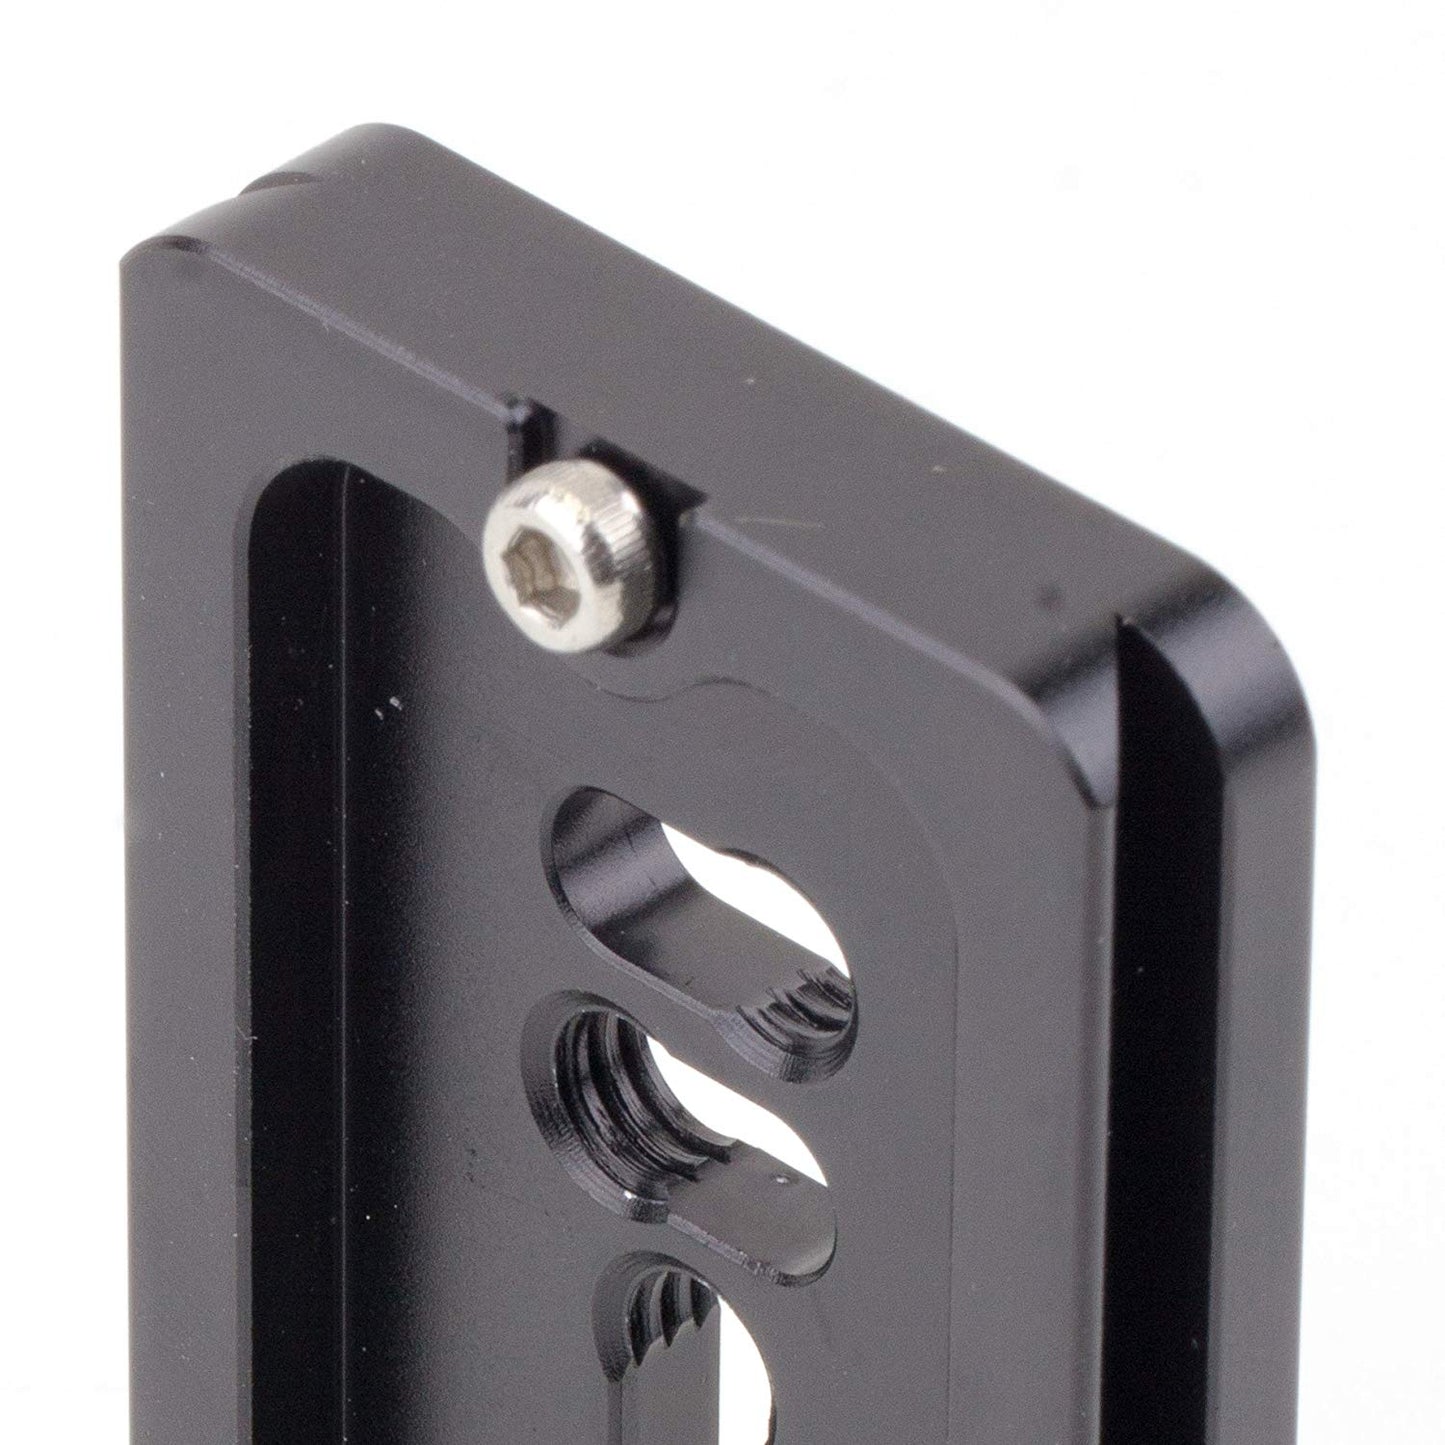 Benro PU-70 Universal Quick Release Plate for J and B Series Ball Head